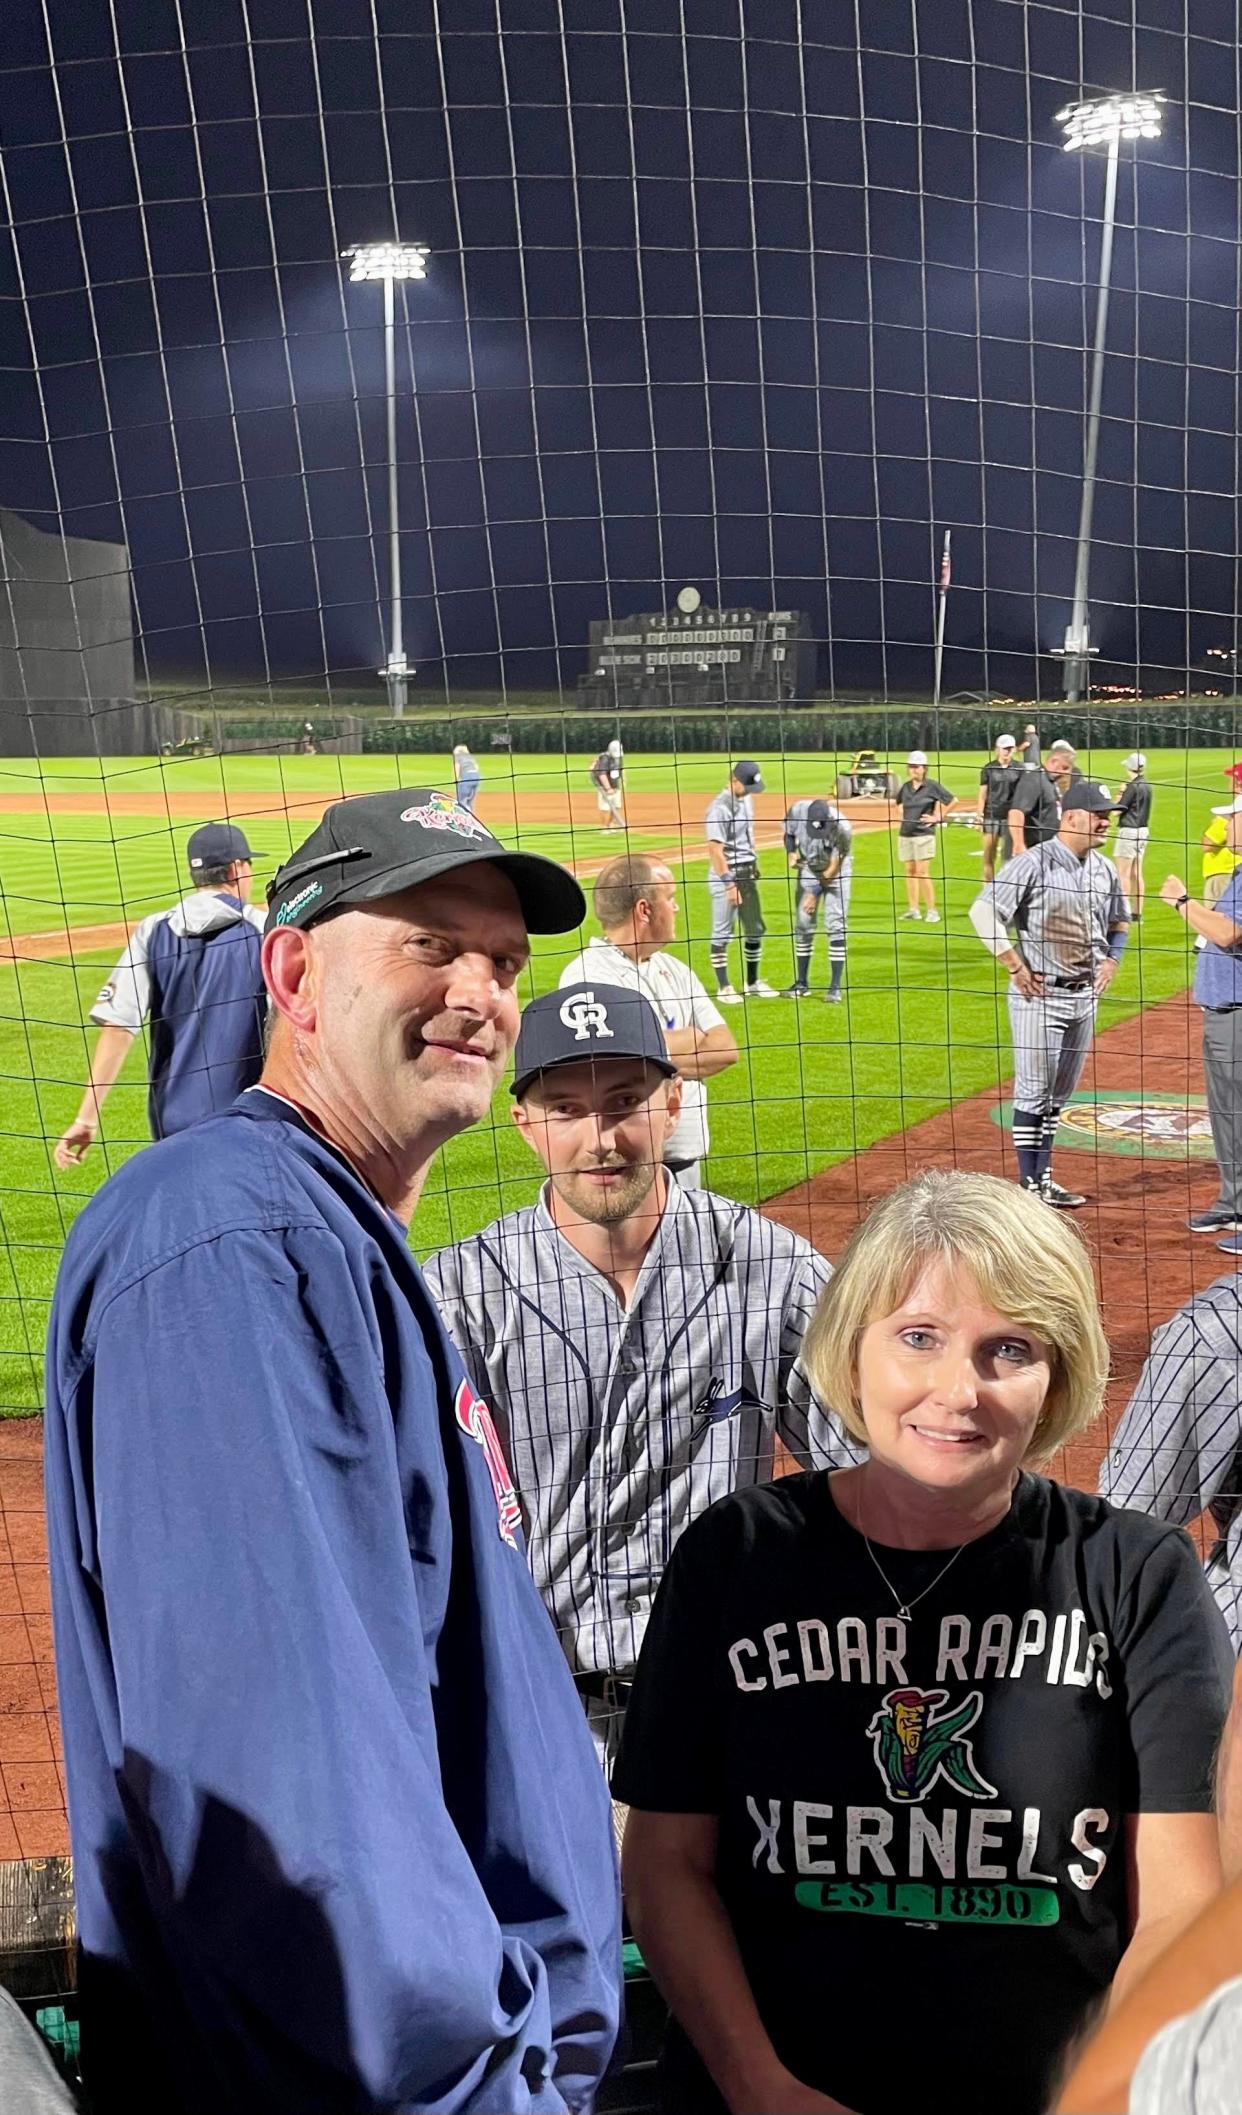 Barb and Dan Mullenbach and son Matt of Waukee stand for a photo at the Field of Dreams in Dyersville on Tuesday, Aug. 9. Matt pitched an inning of scoreless relief for the Cedar Rapids Kernels in the first minor-league baseball game played at the iconic site.